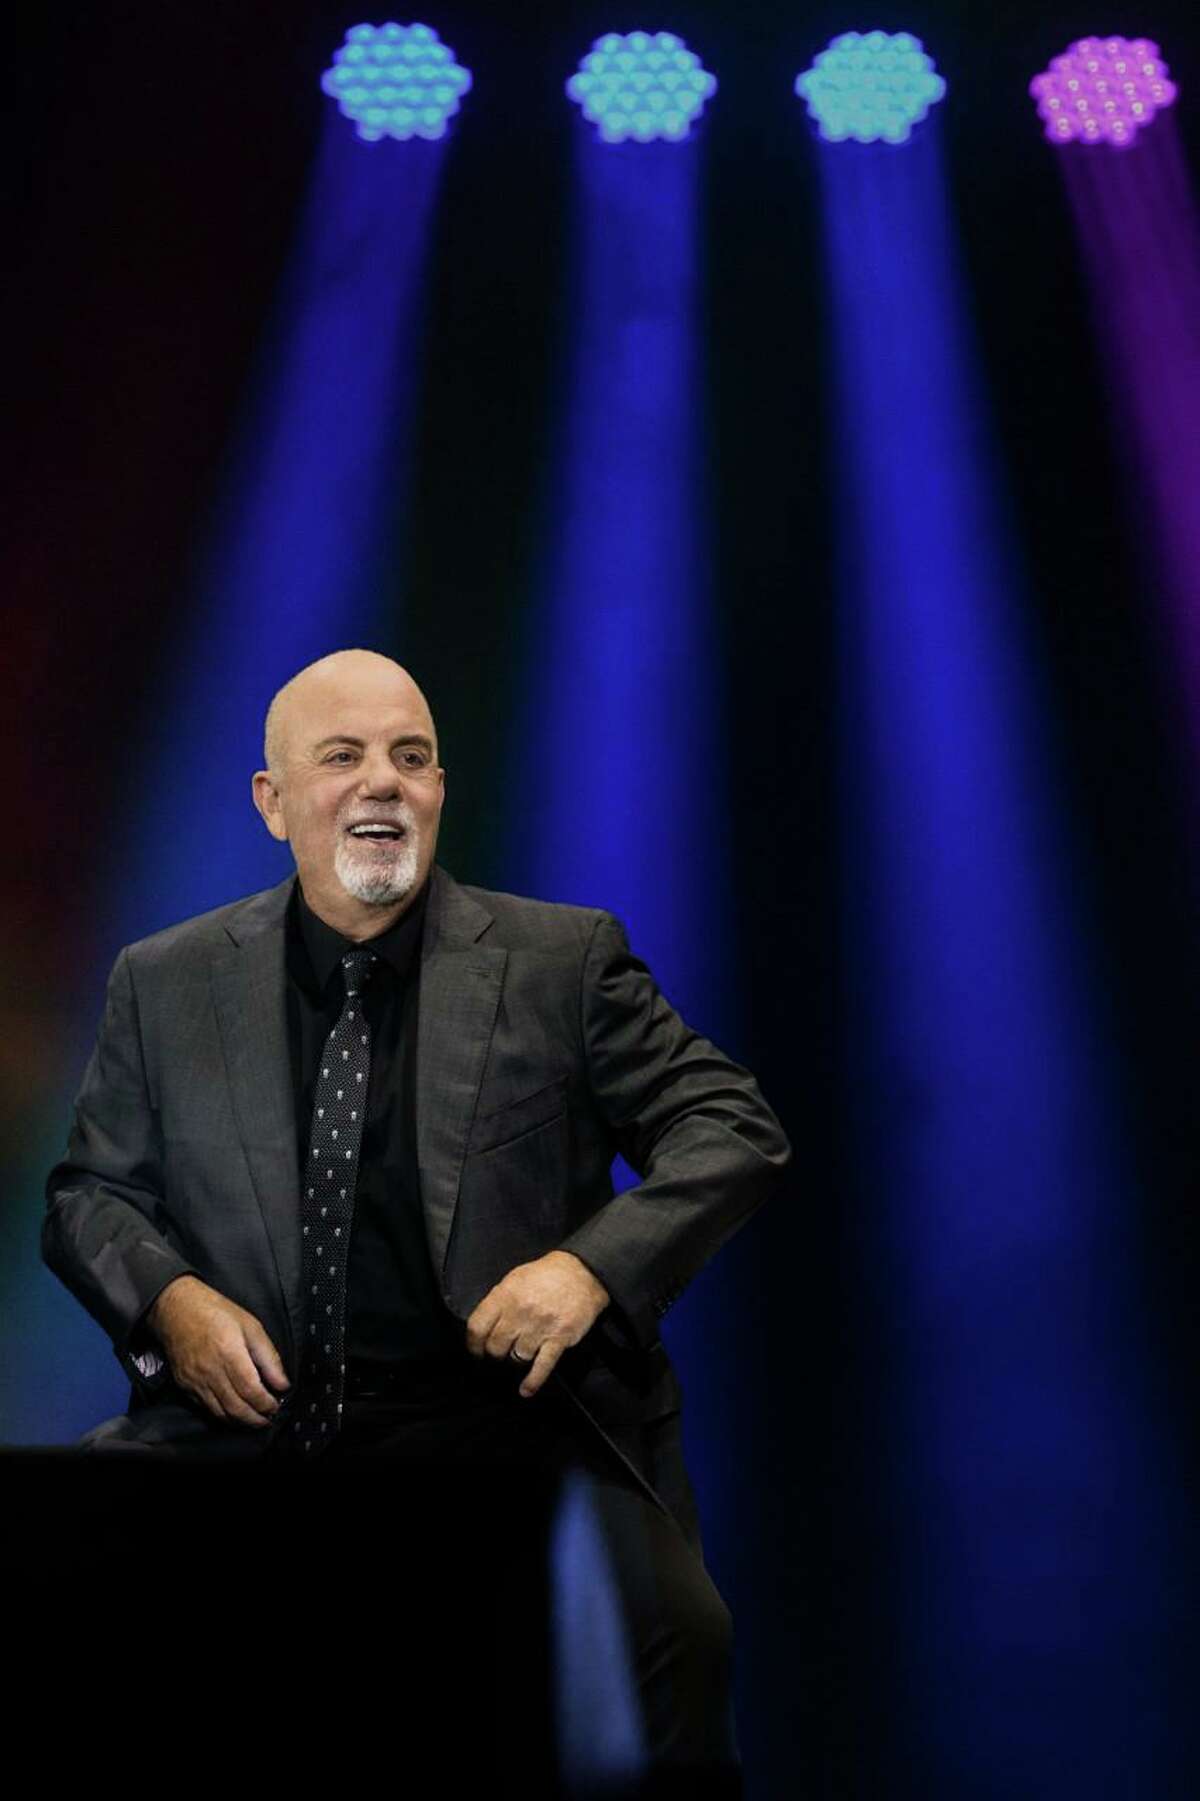 Billy Joel will be the headliner for the 2022 edition of the Greenwich Town Party. The daylong concert is set to return to the start of Memorial Day weekend, after a cancellation in 2020 and a delay until Labor Day in 2021.